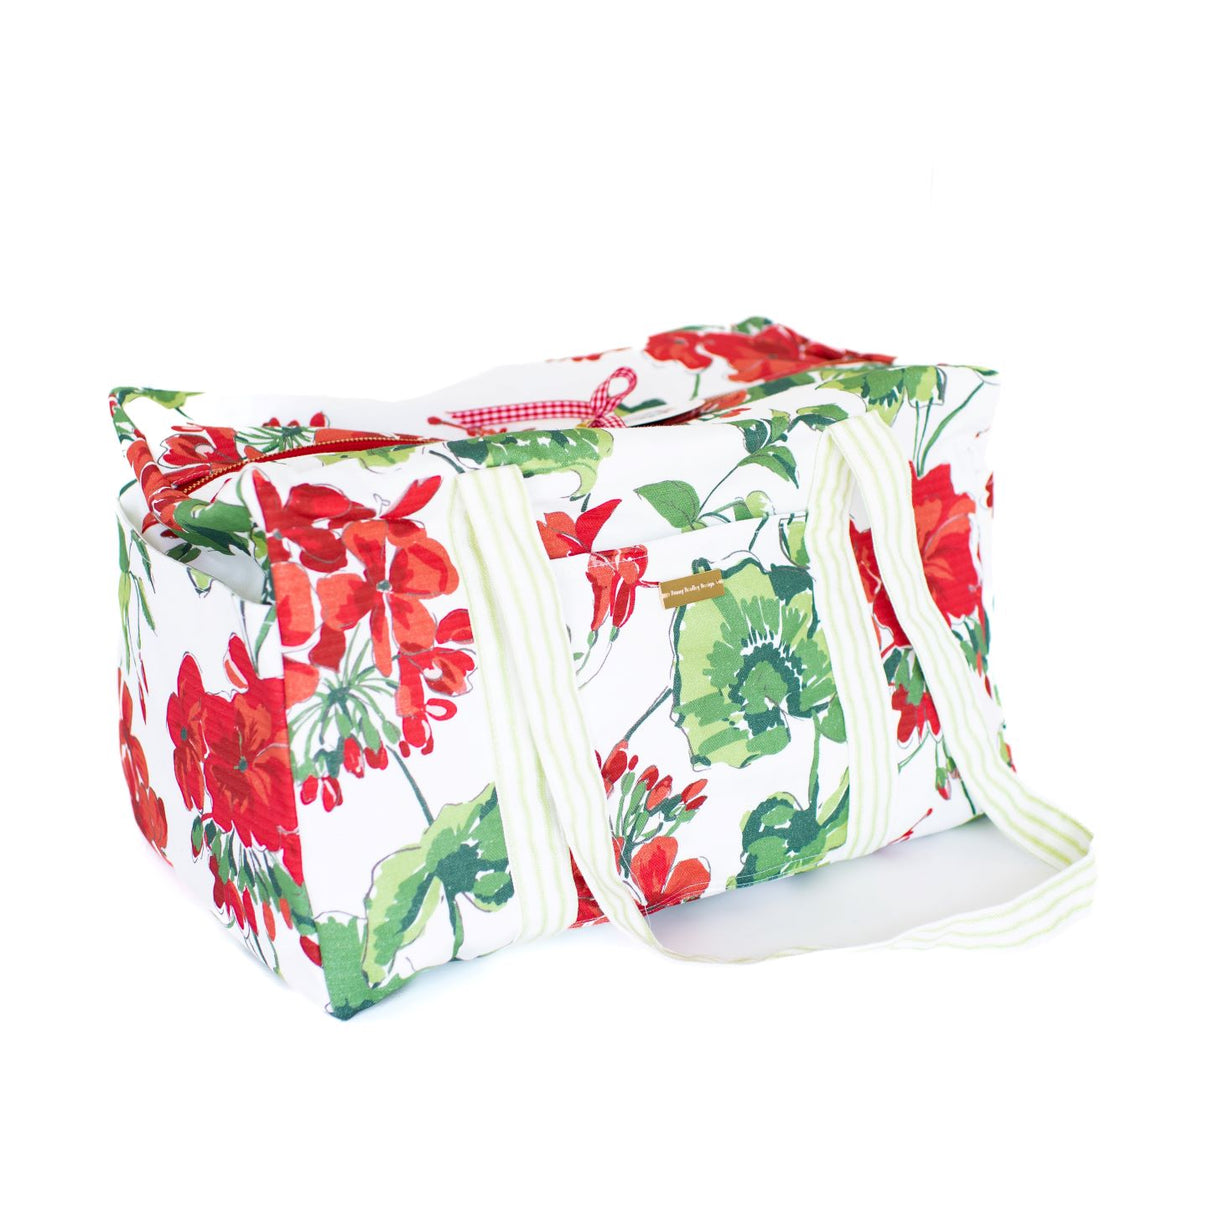 Small Duffle Bag in Cottage Grove Geranium Red